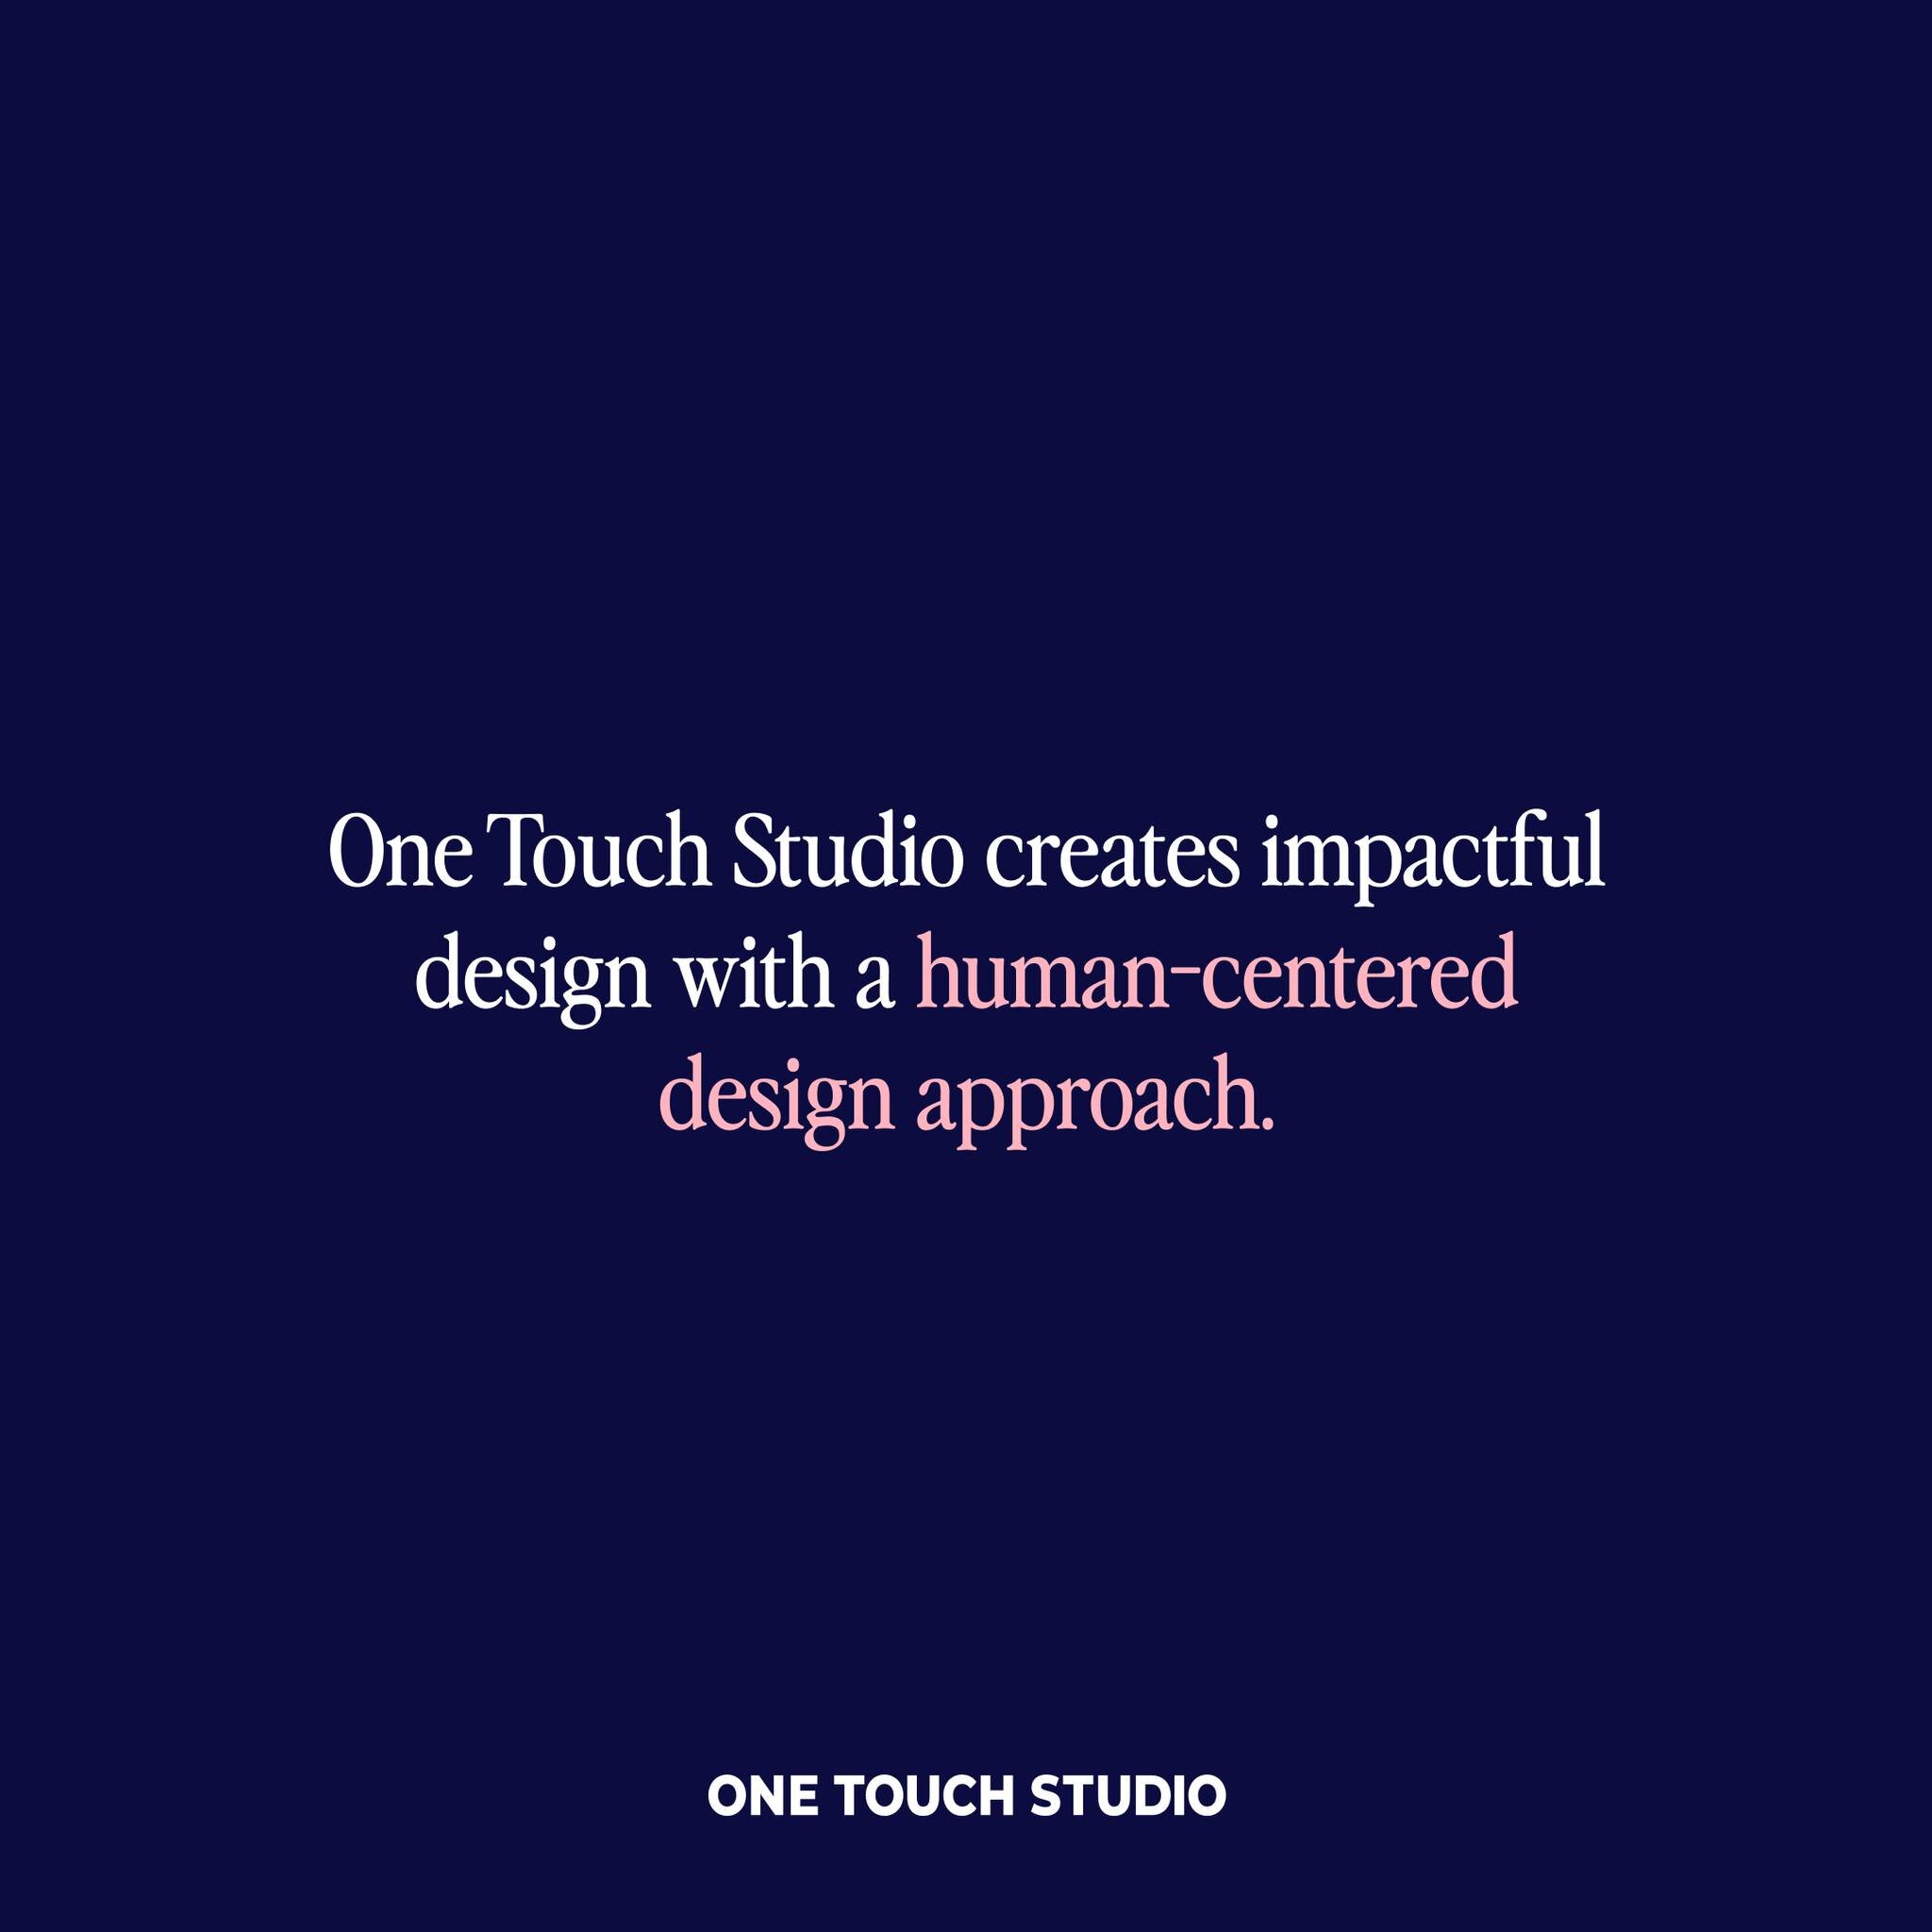 Ever wondered what it means to use a human-centered design approach in branding? Well now you know!

It was important for me to build One Touch Studio on the basis of human relationships. I use this approach to understand and empathise with your want